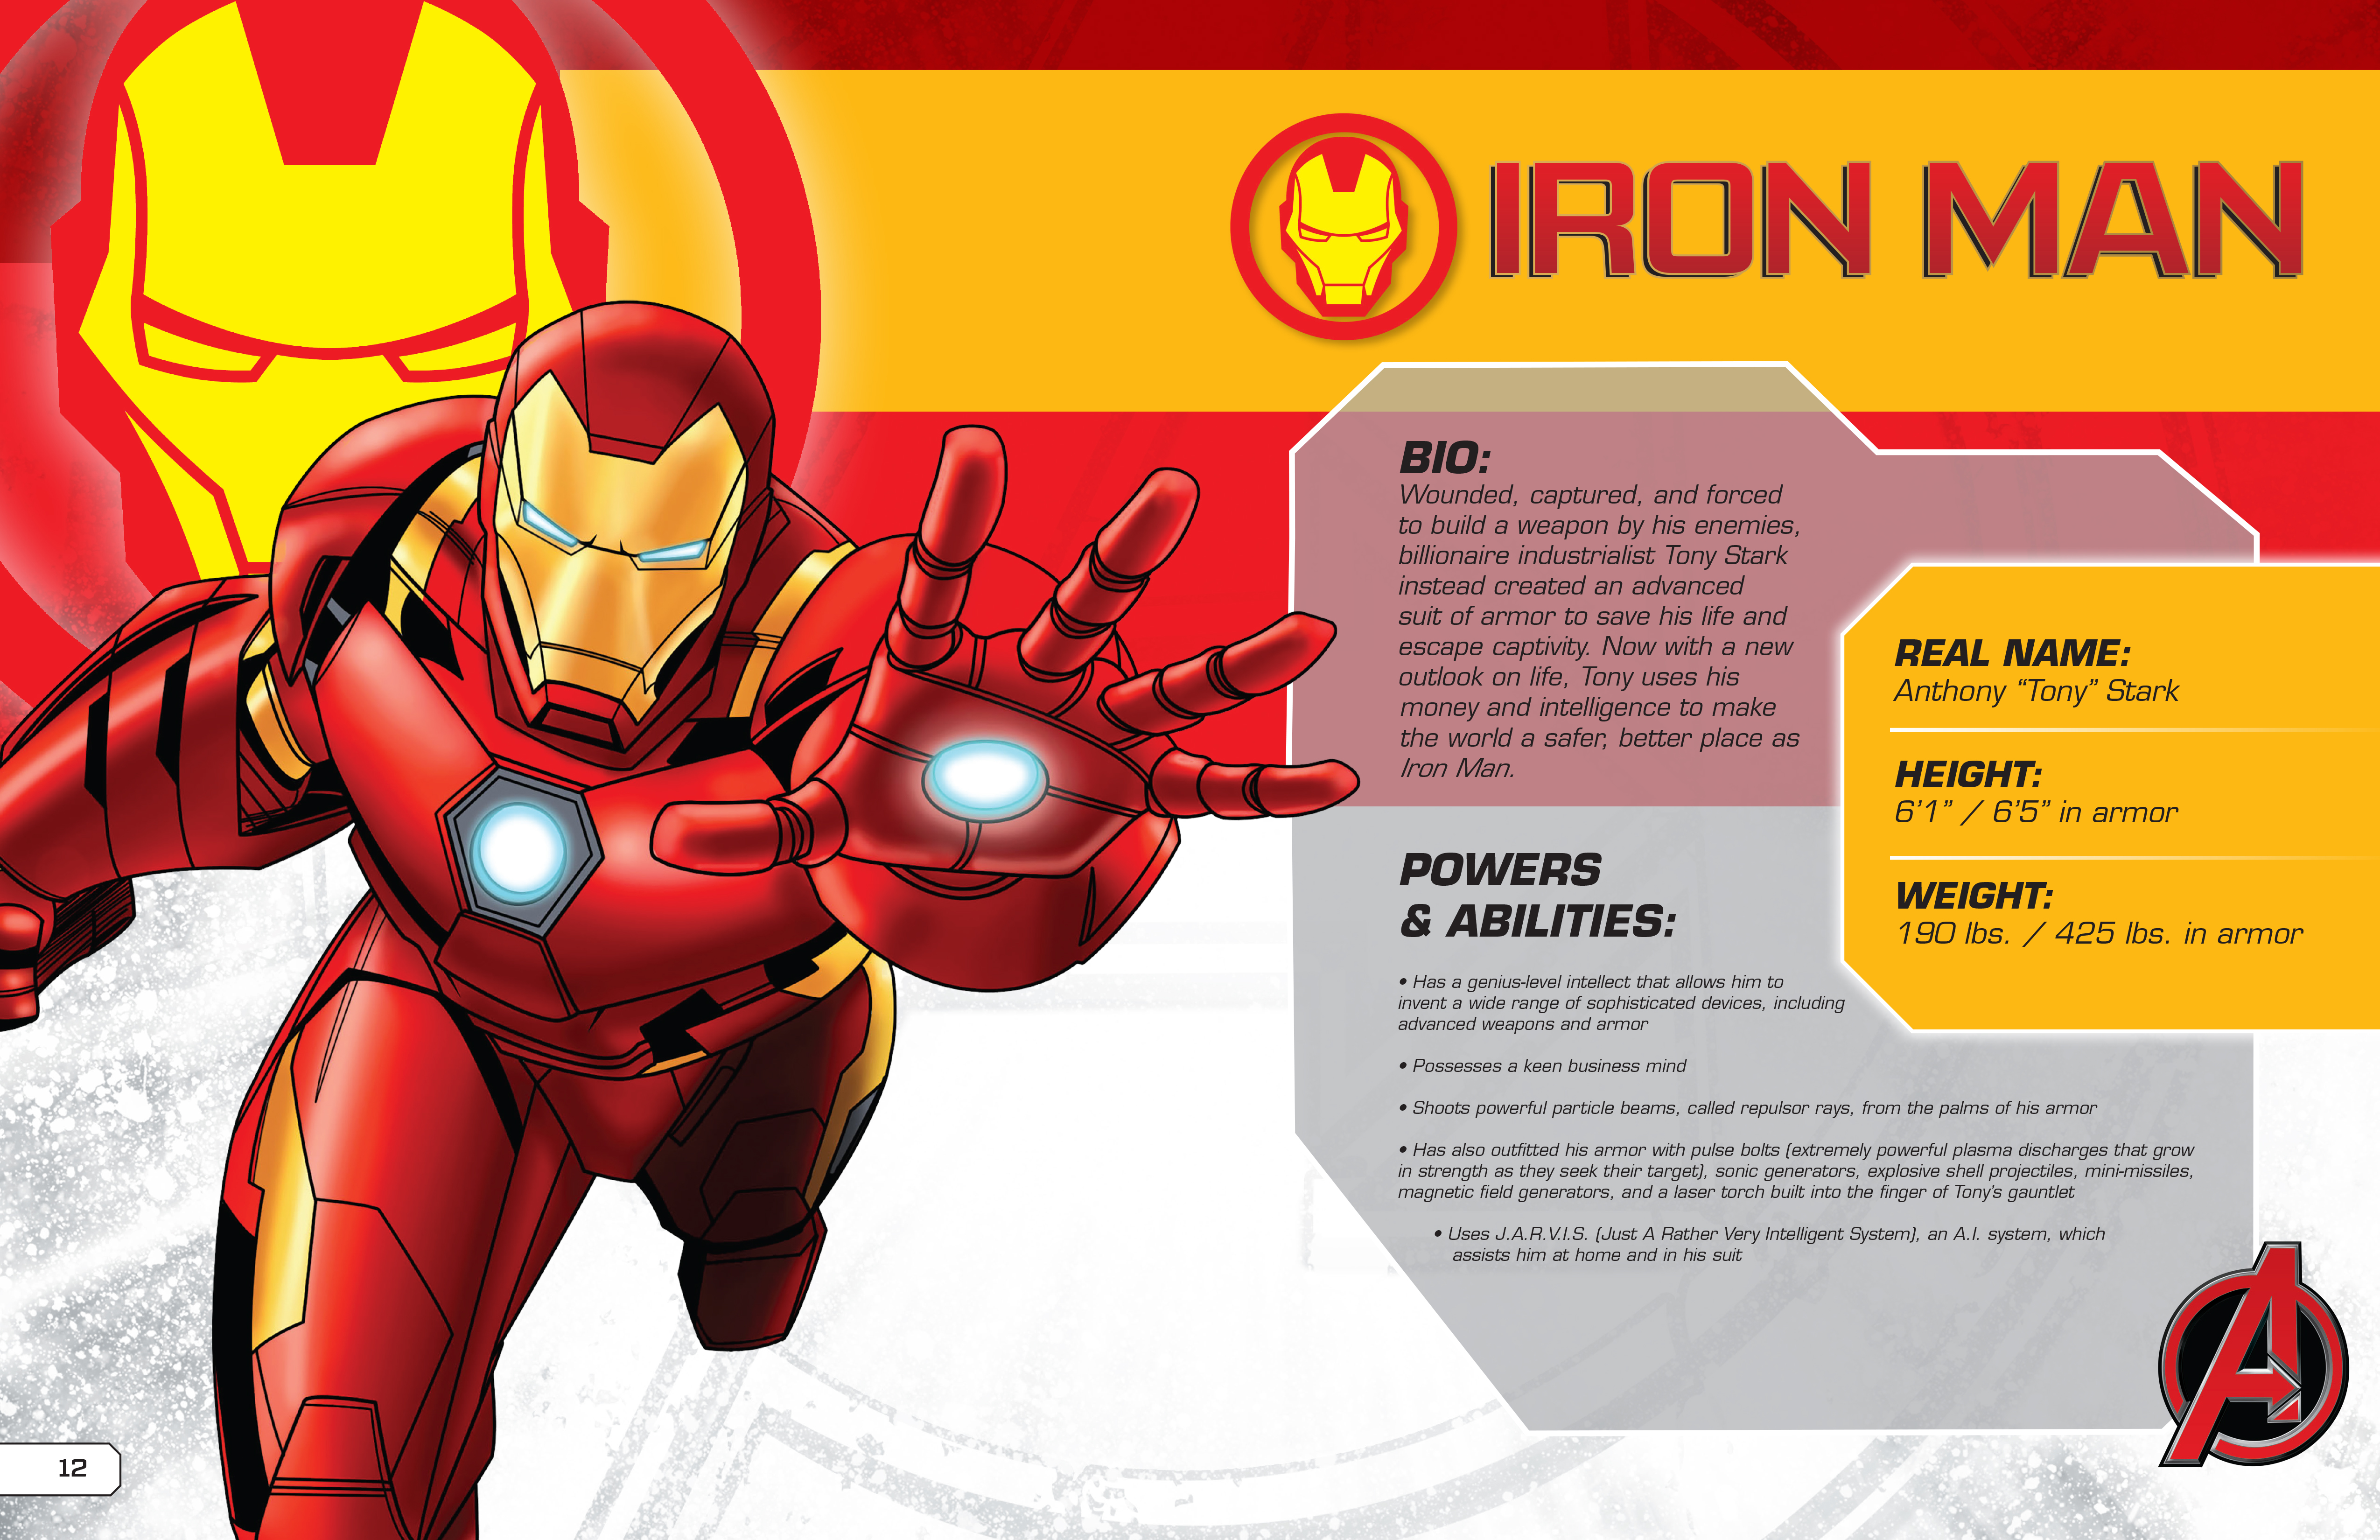 Learn to Draw Marvel's The Avengers by Walter Foster Creative Team | Quarto  At A Glance | The Quarto Group